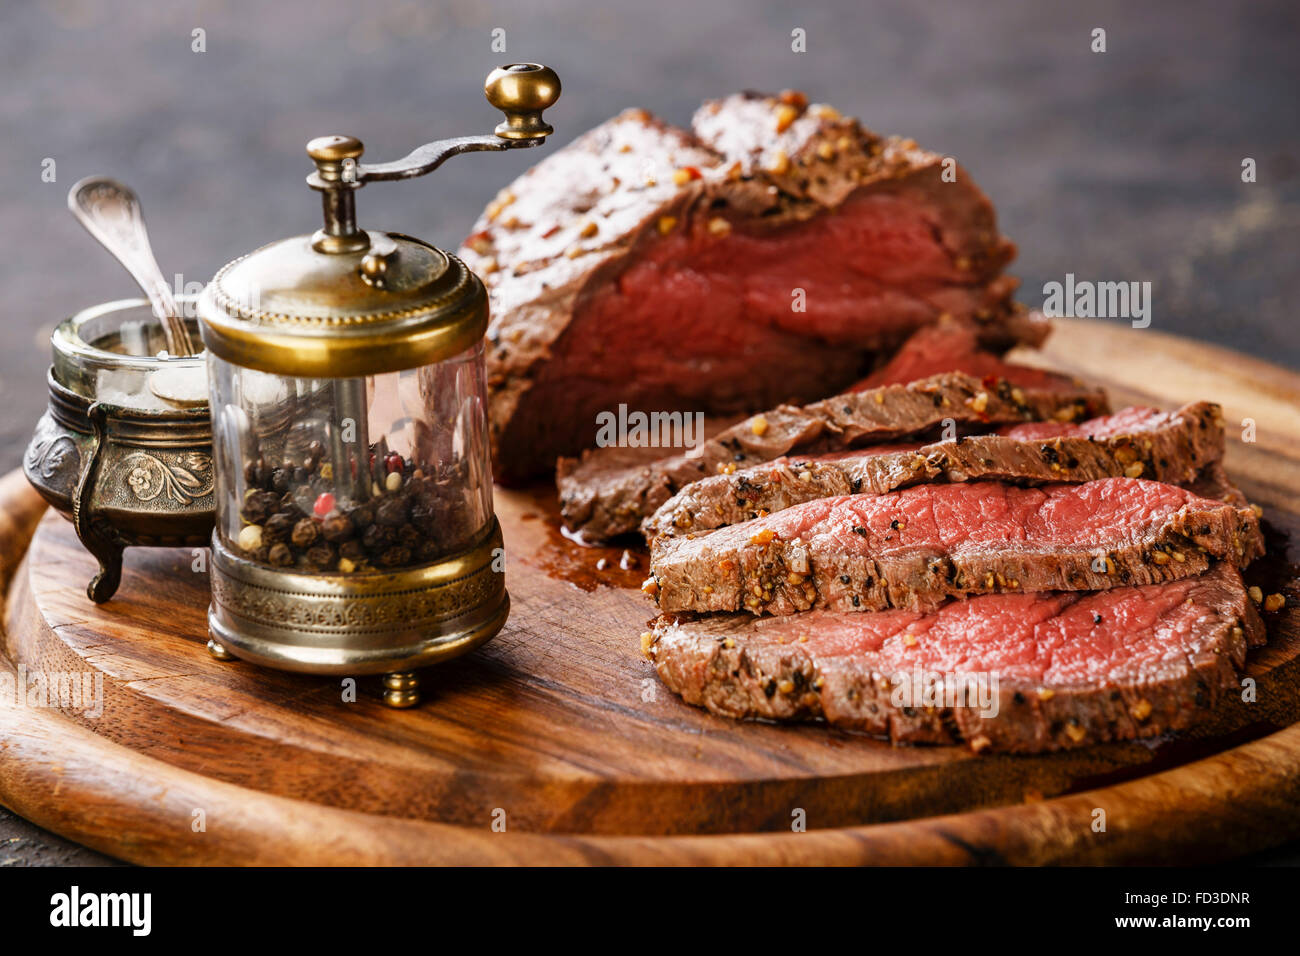 Roast beef on cutting board with saltcellar and pepper mill Stock Photo